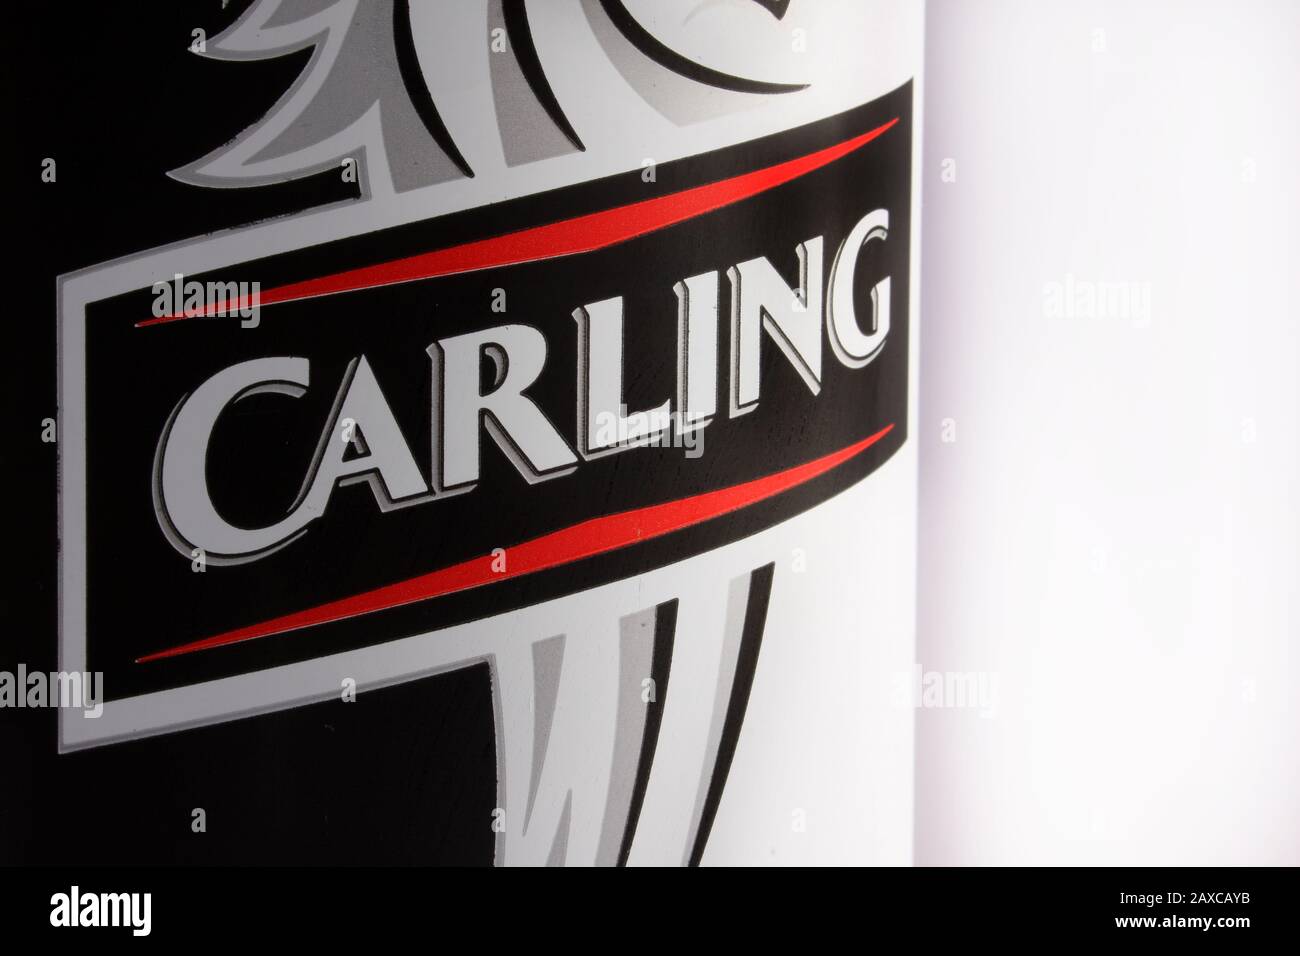 Can Of Carling Black Label High Resolution Stock Photography and Images -  Alamy